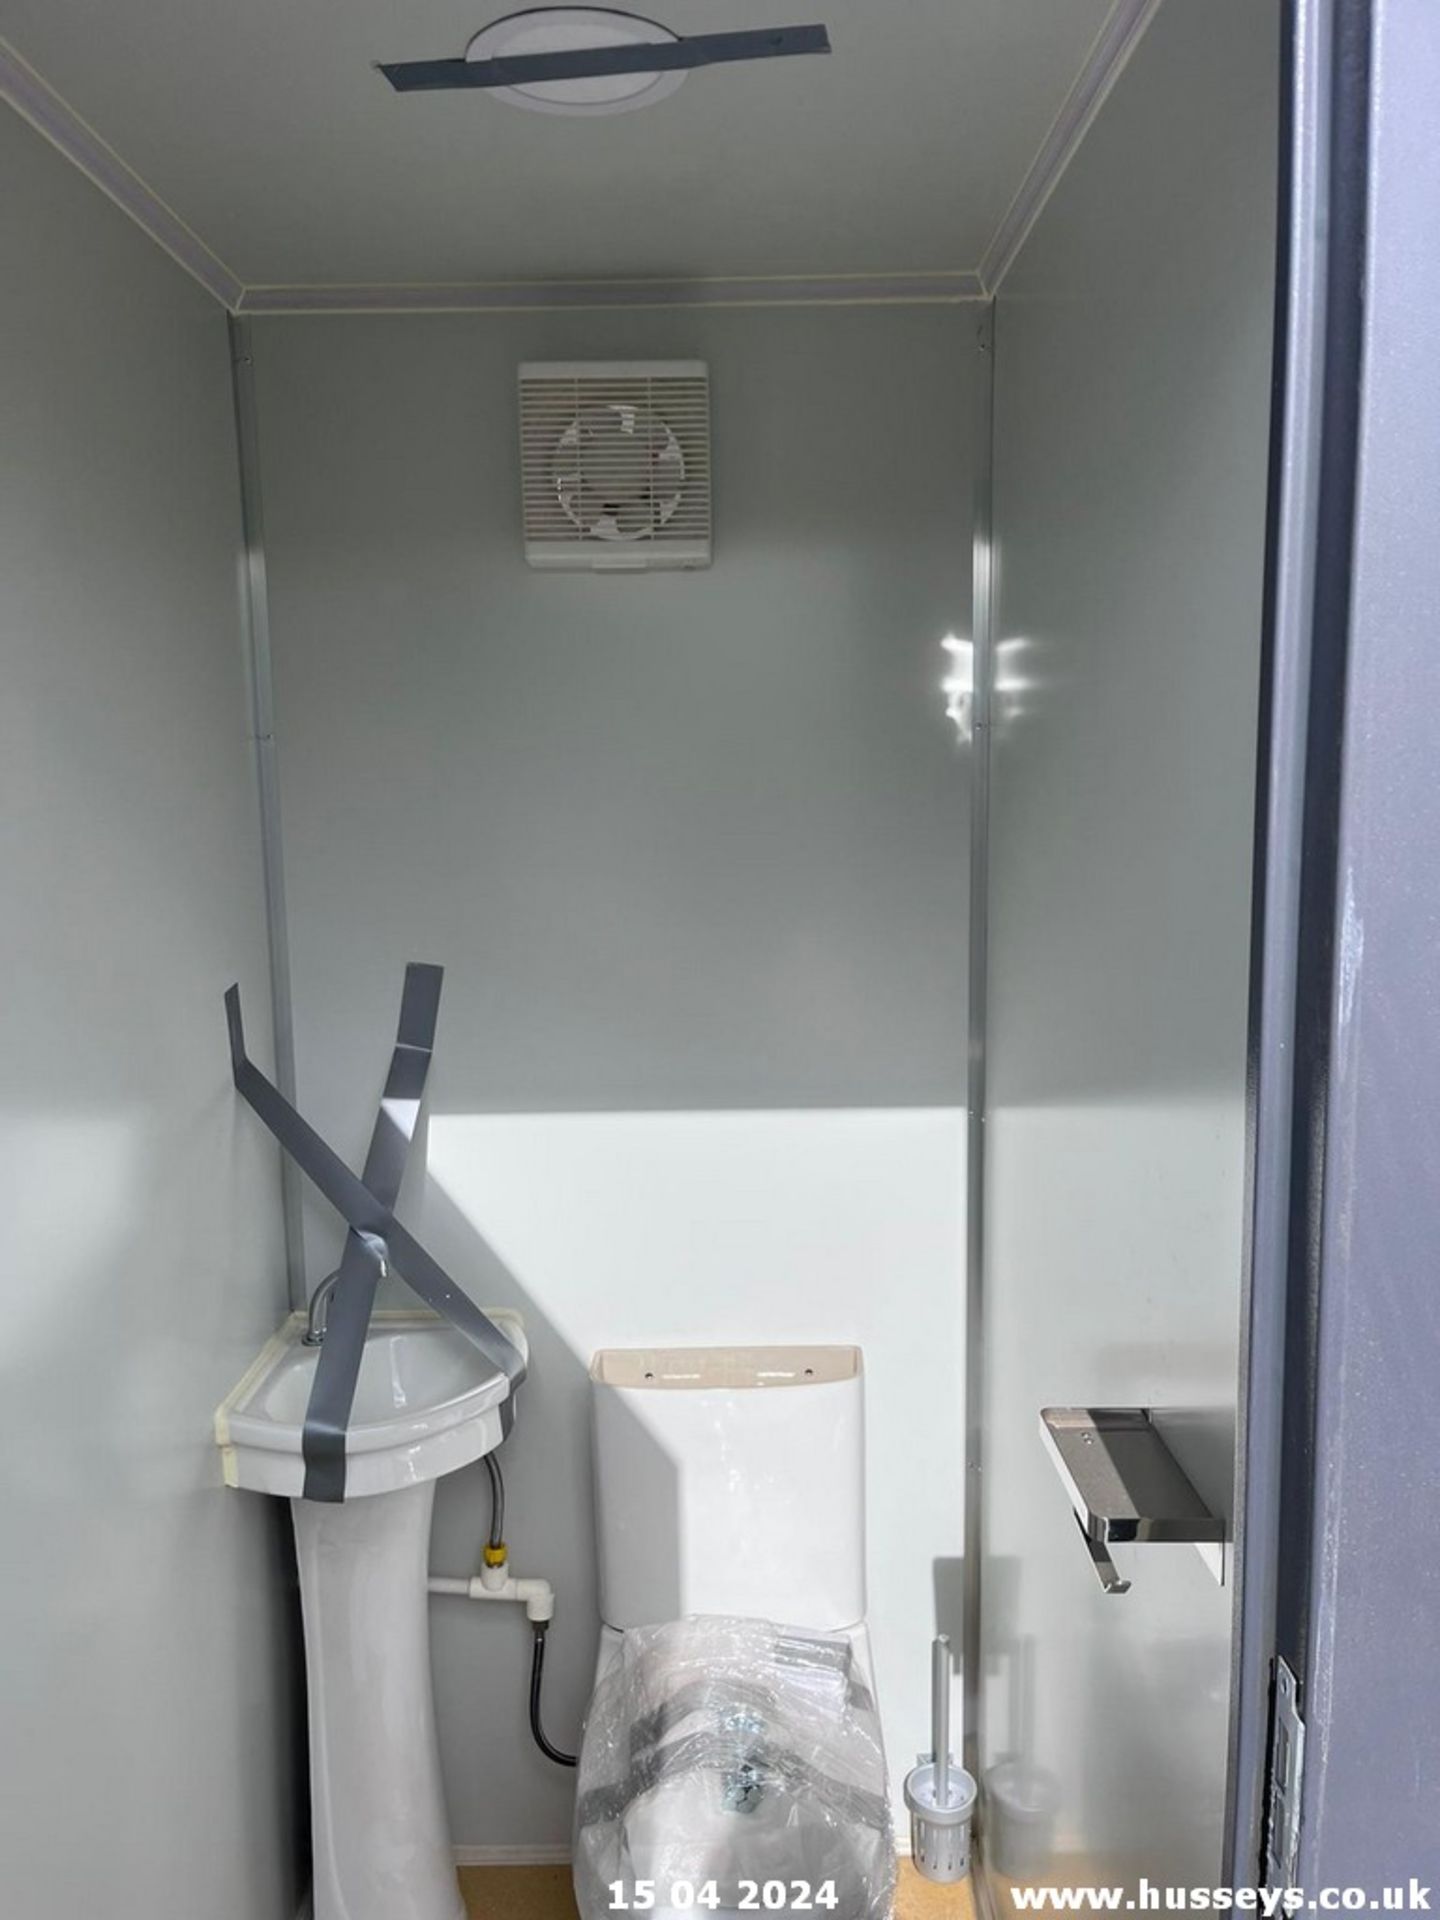 2 PERSON TOILET C.W FORK POCKETS & LIFT EYES 2X WC'S SINKS LIGHTS EXTRACTORS & KEYS - Image 10 of 10